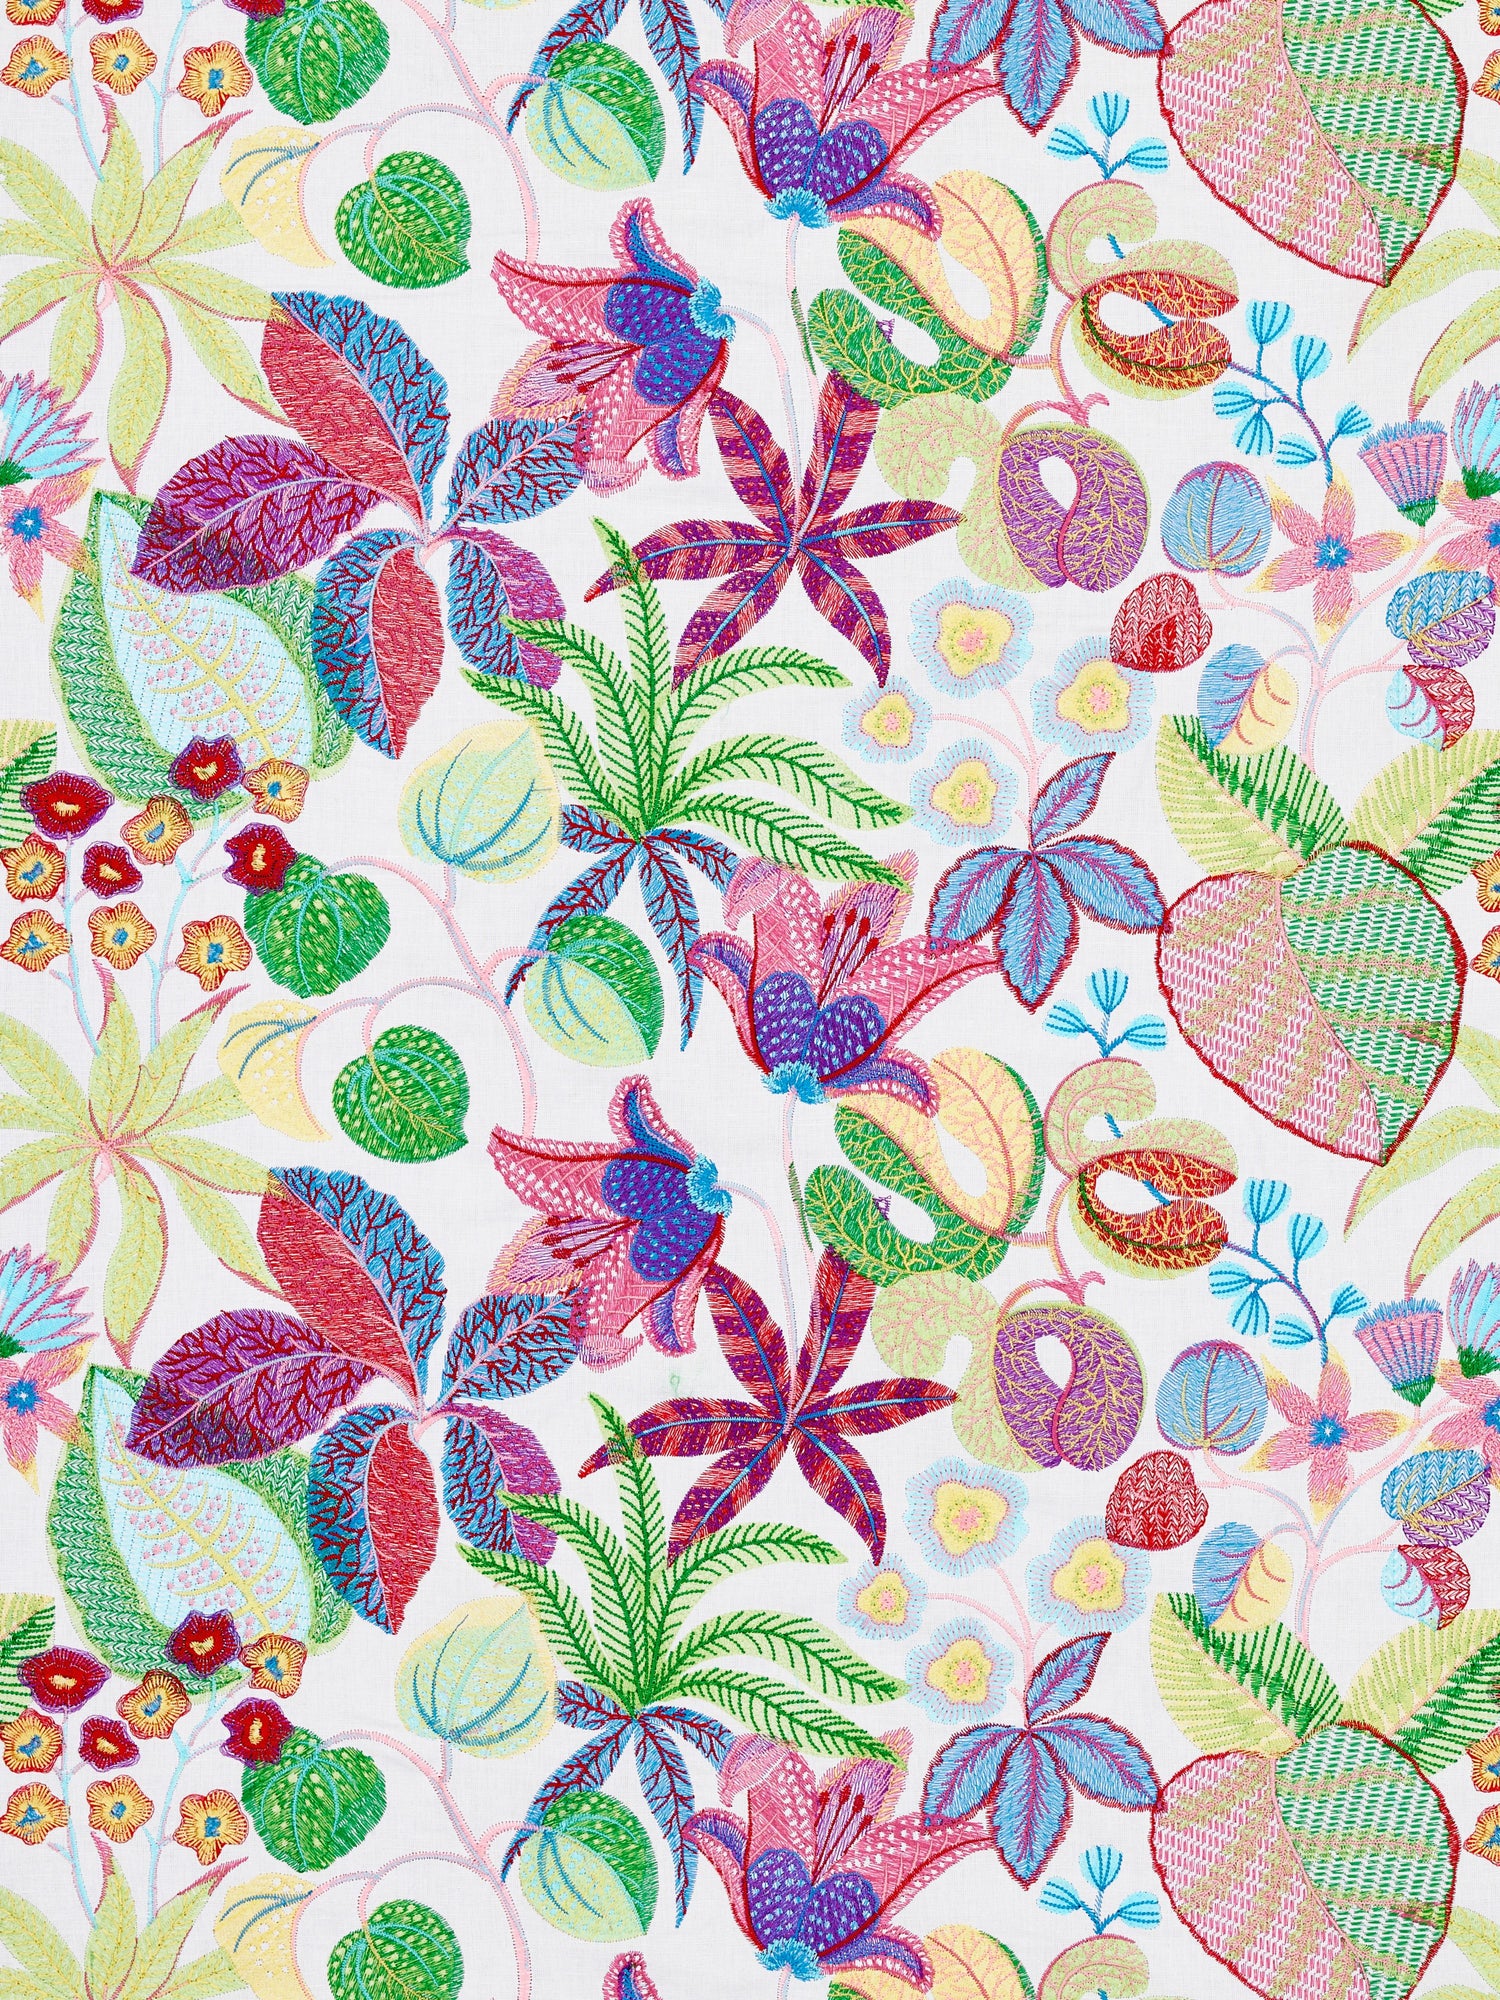 Greenhouse fabric in bouquet color - pattern number S7 00015400 - by Scalamandre in the Old World Weavers collection